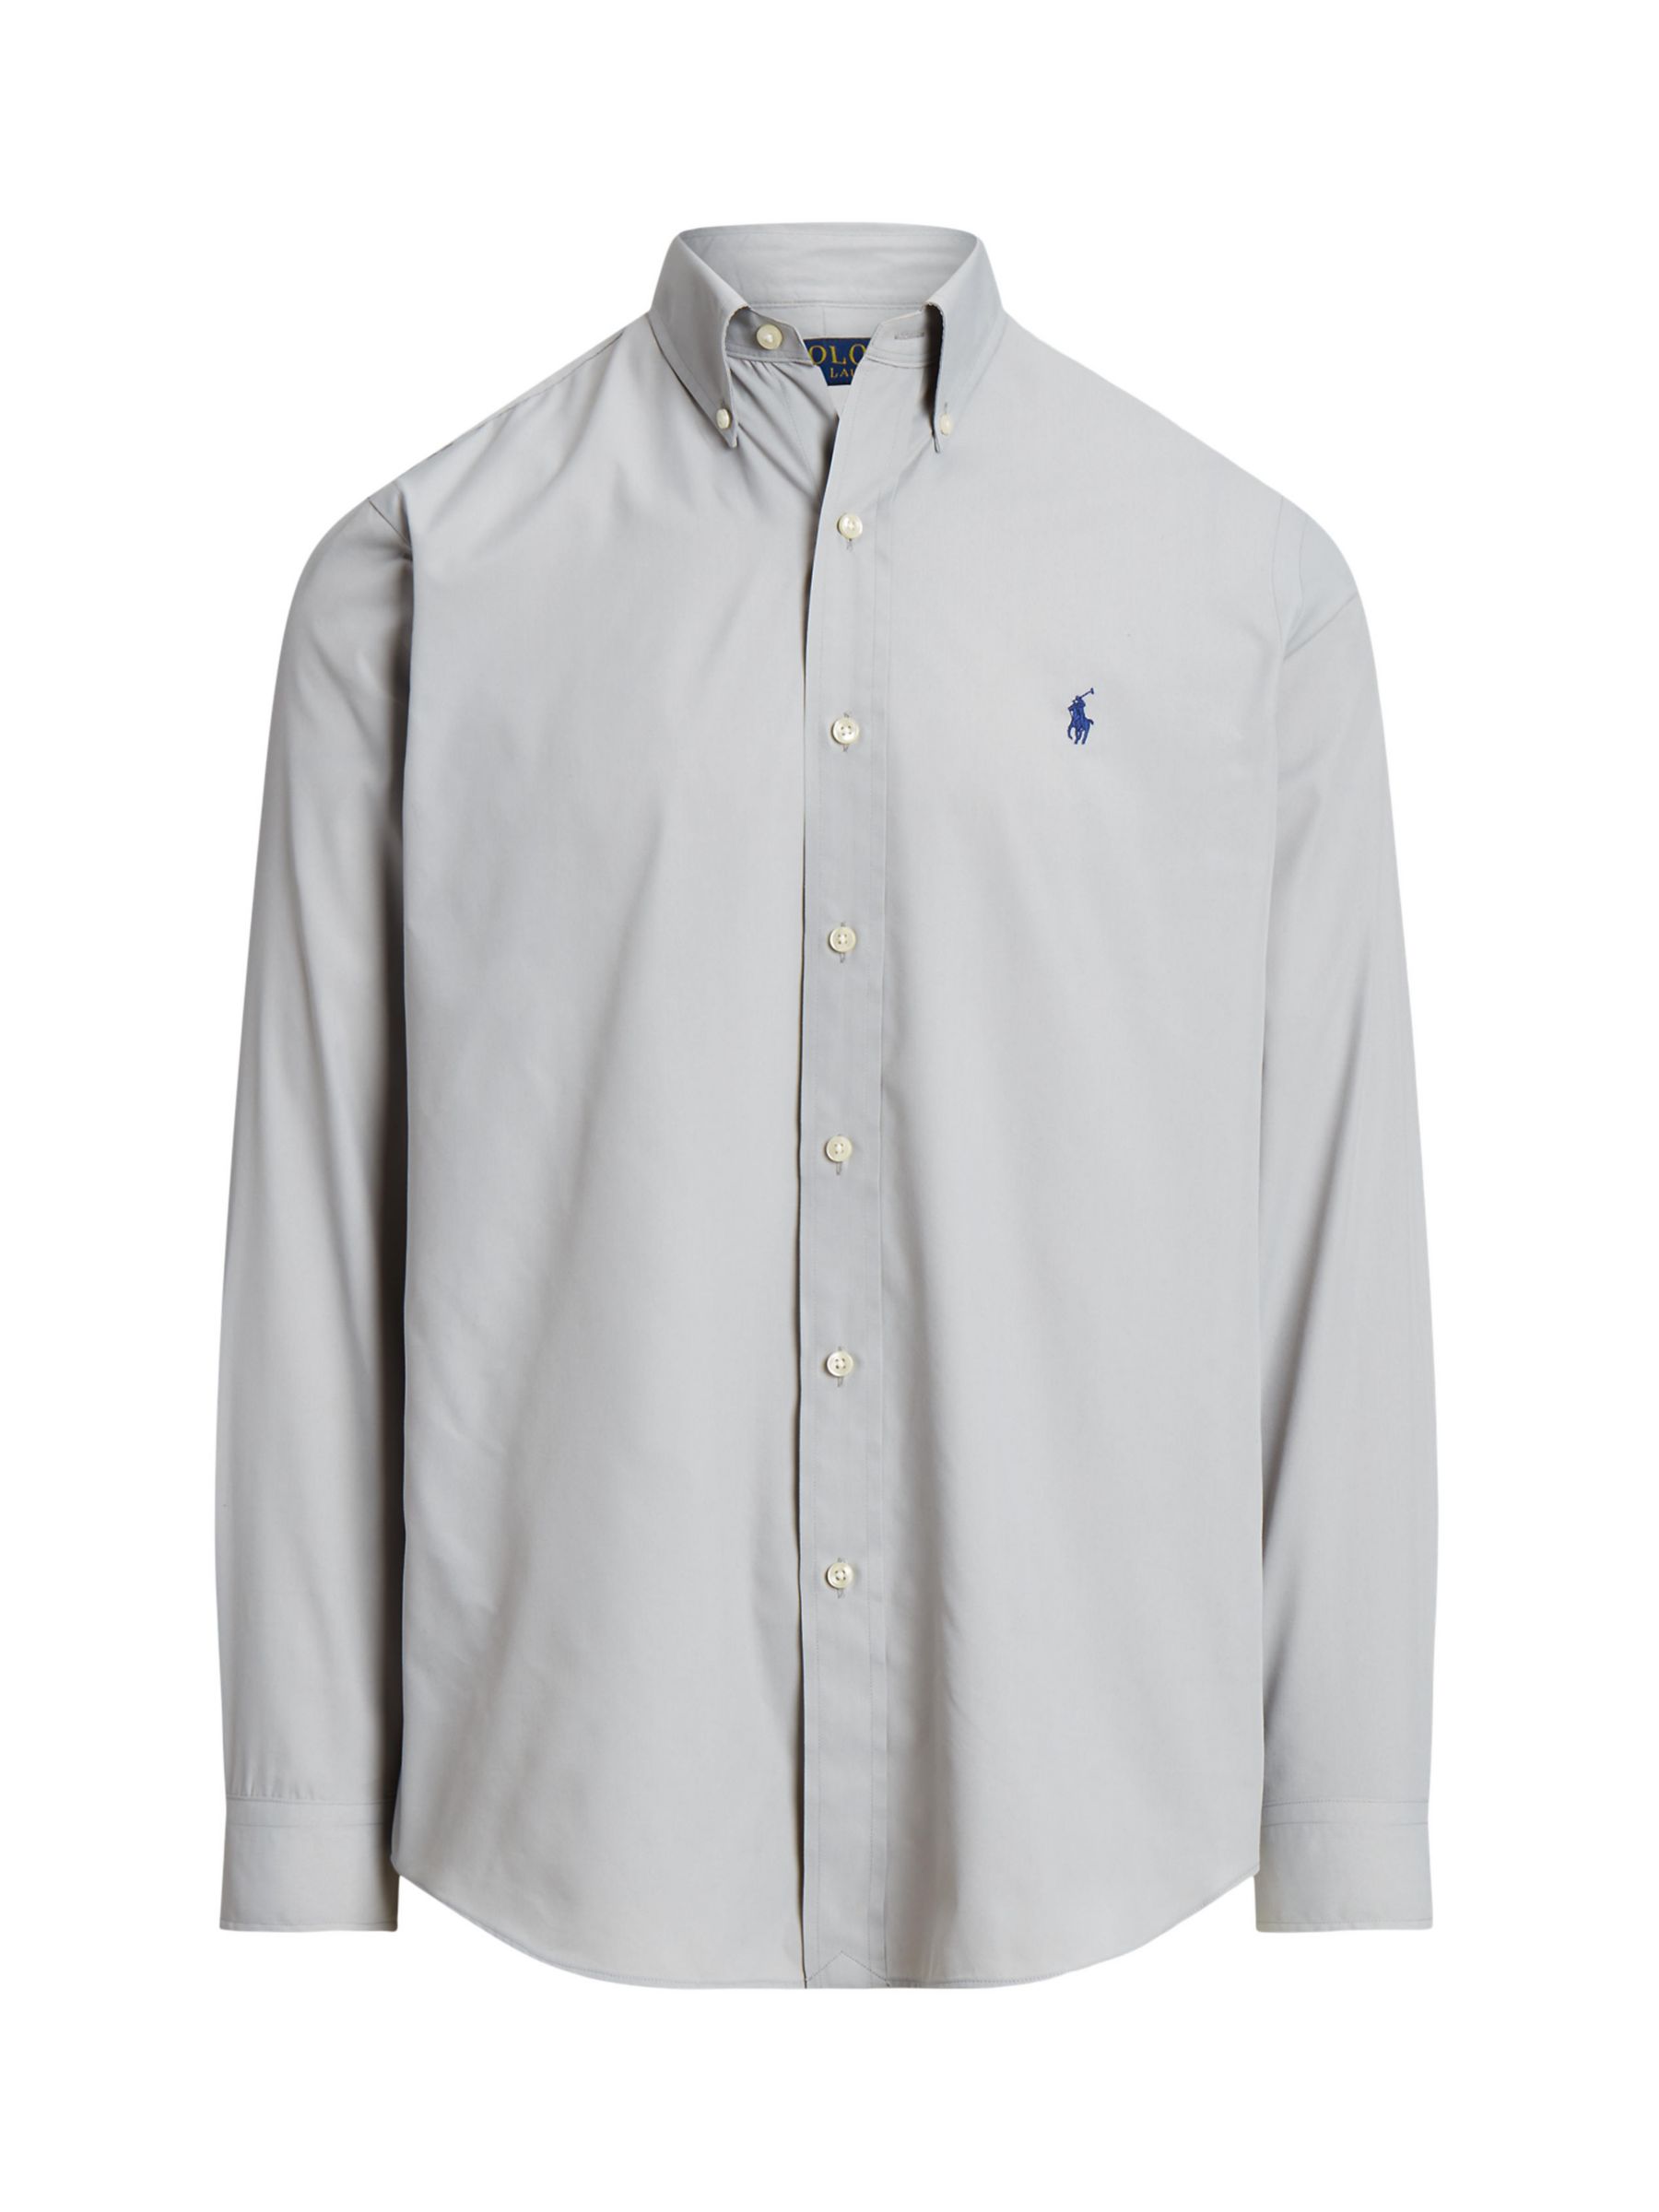 Polo Ralph Lauren Long Sleeve Classic Fit Performance Twill Shirt, Soft  Grey at John Lewis & Partners